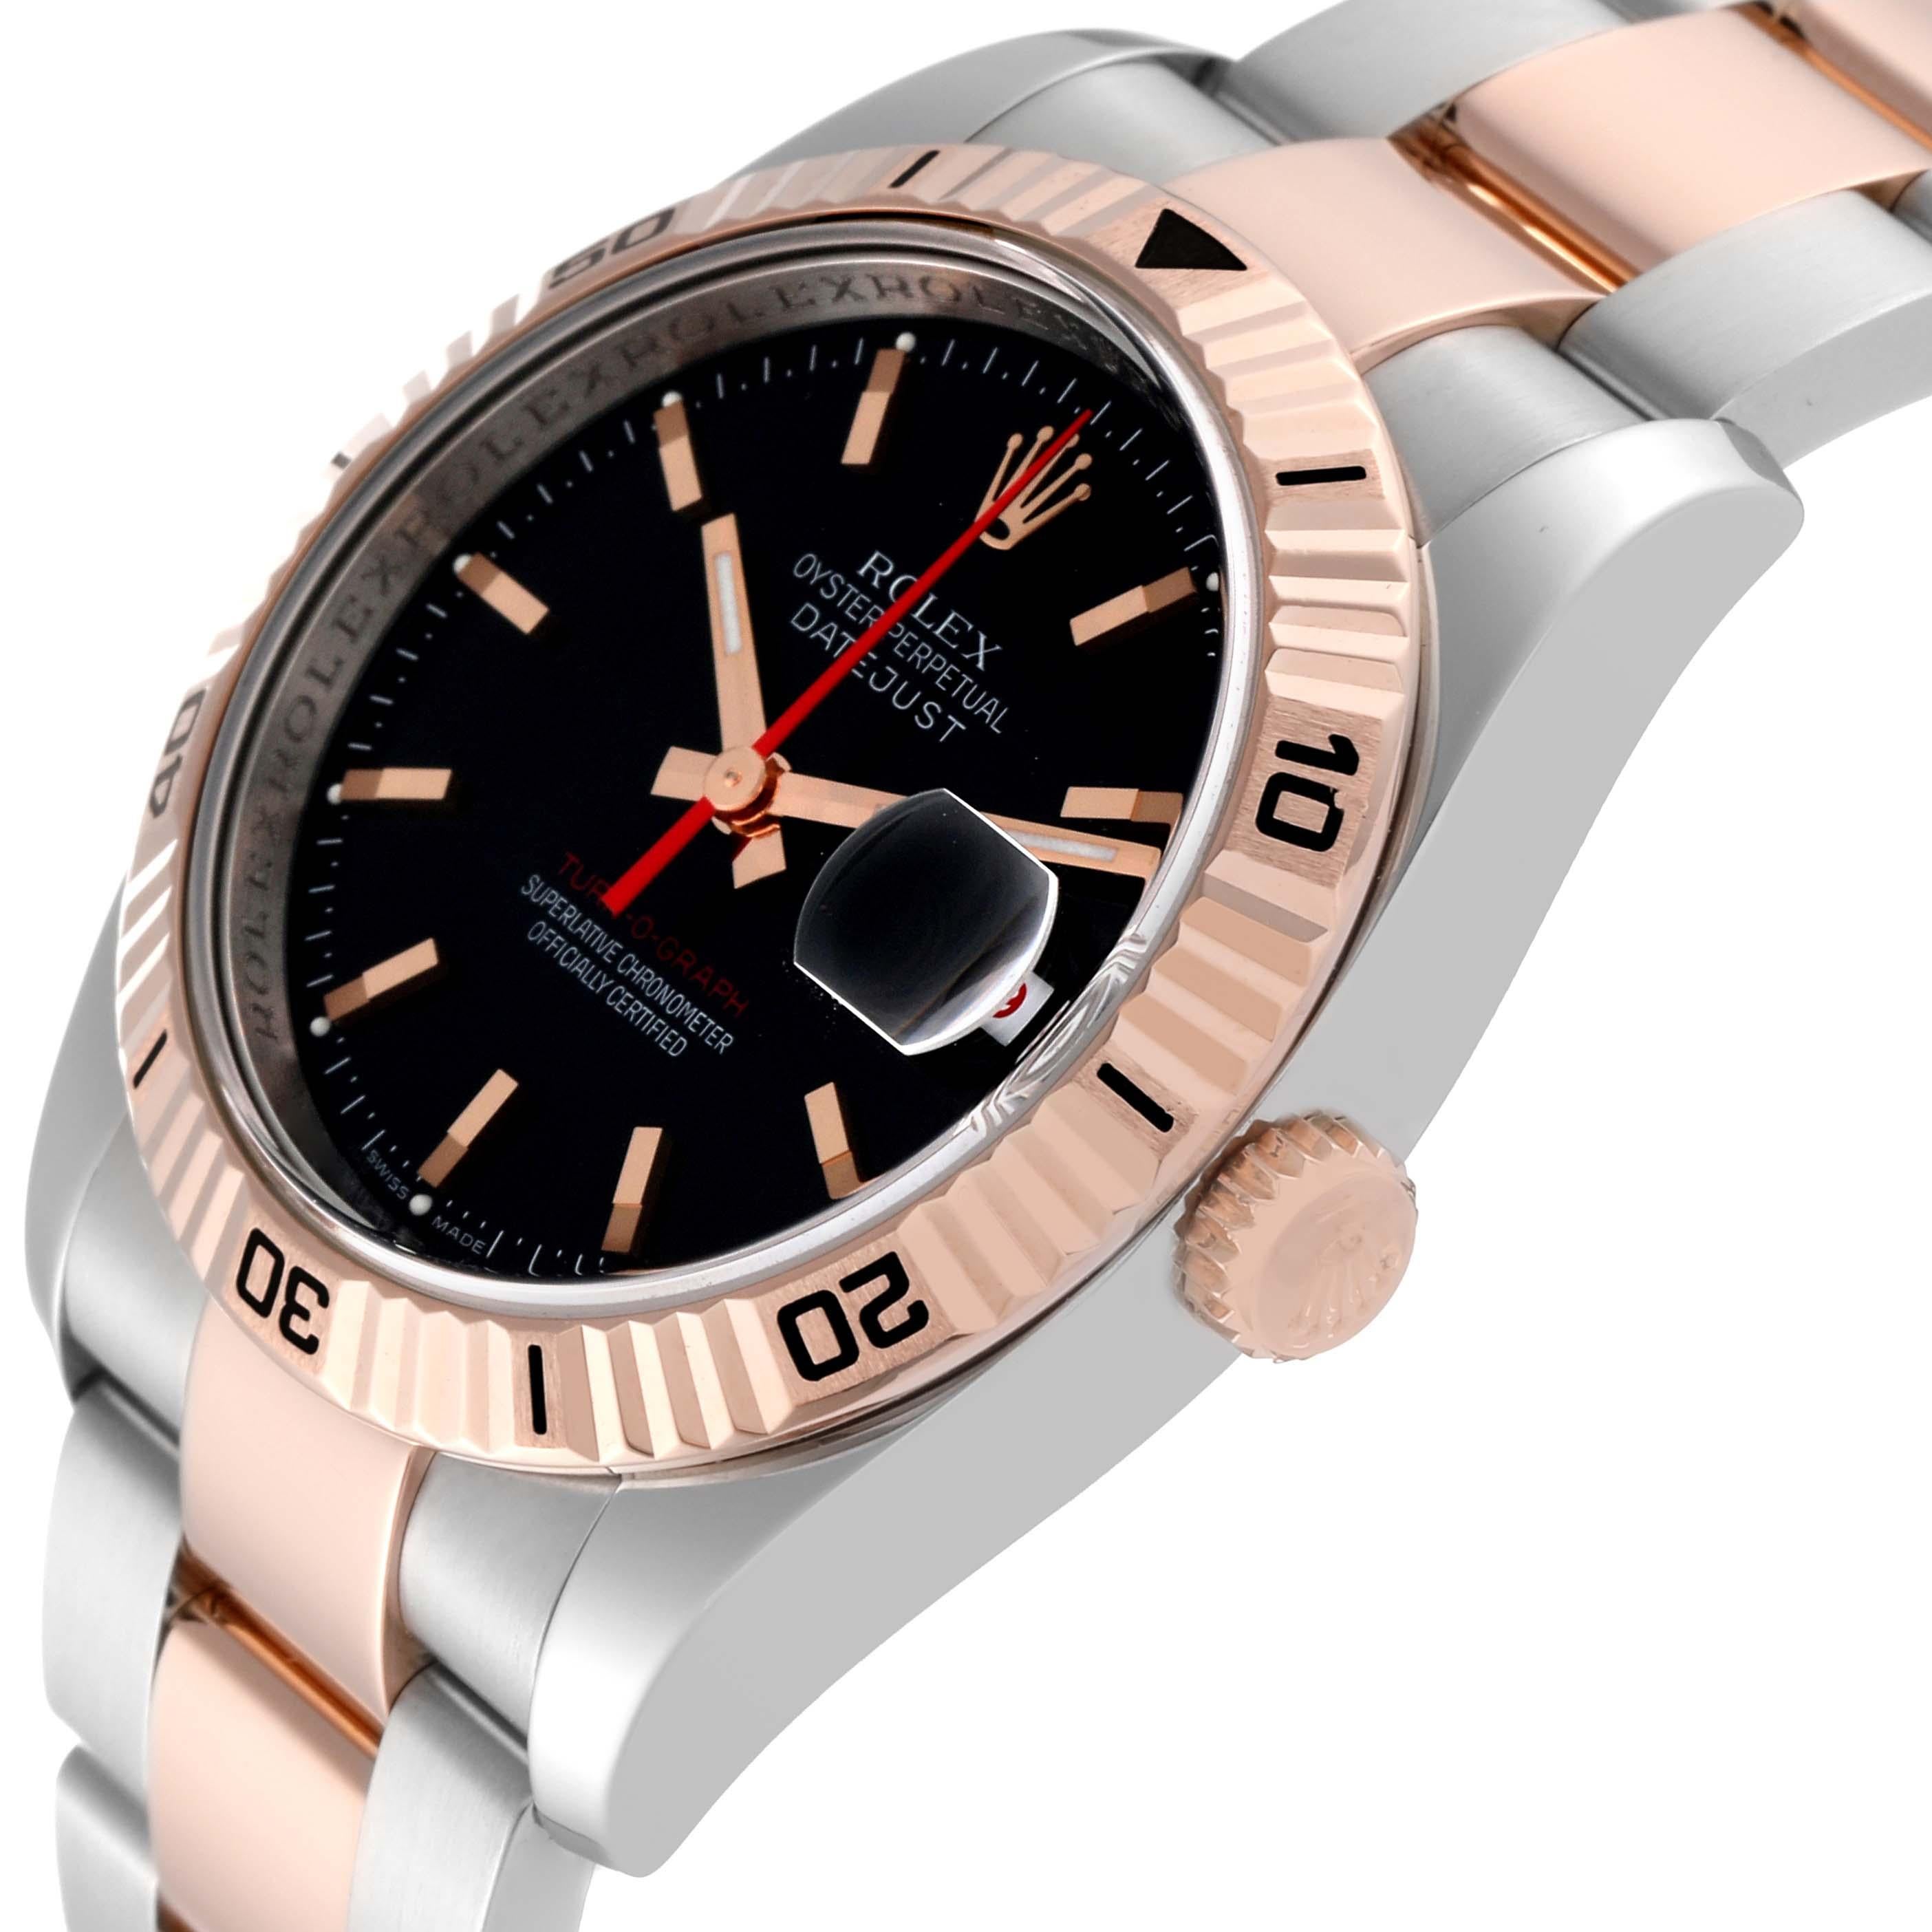 Rolex Datejust Turnograph Black Dial Steel Rose Gold Mens Watch 116261. Officially certified chronometer automatic self-winding movement. Stainless steel case 36.0 mm in diameter. Rolex logo on the crown. 18k Everose gold fluted bidirectional